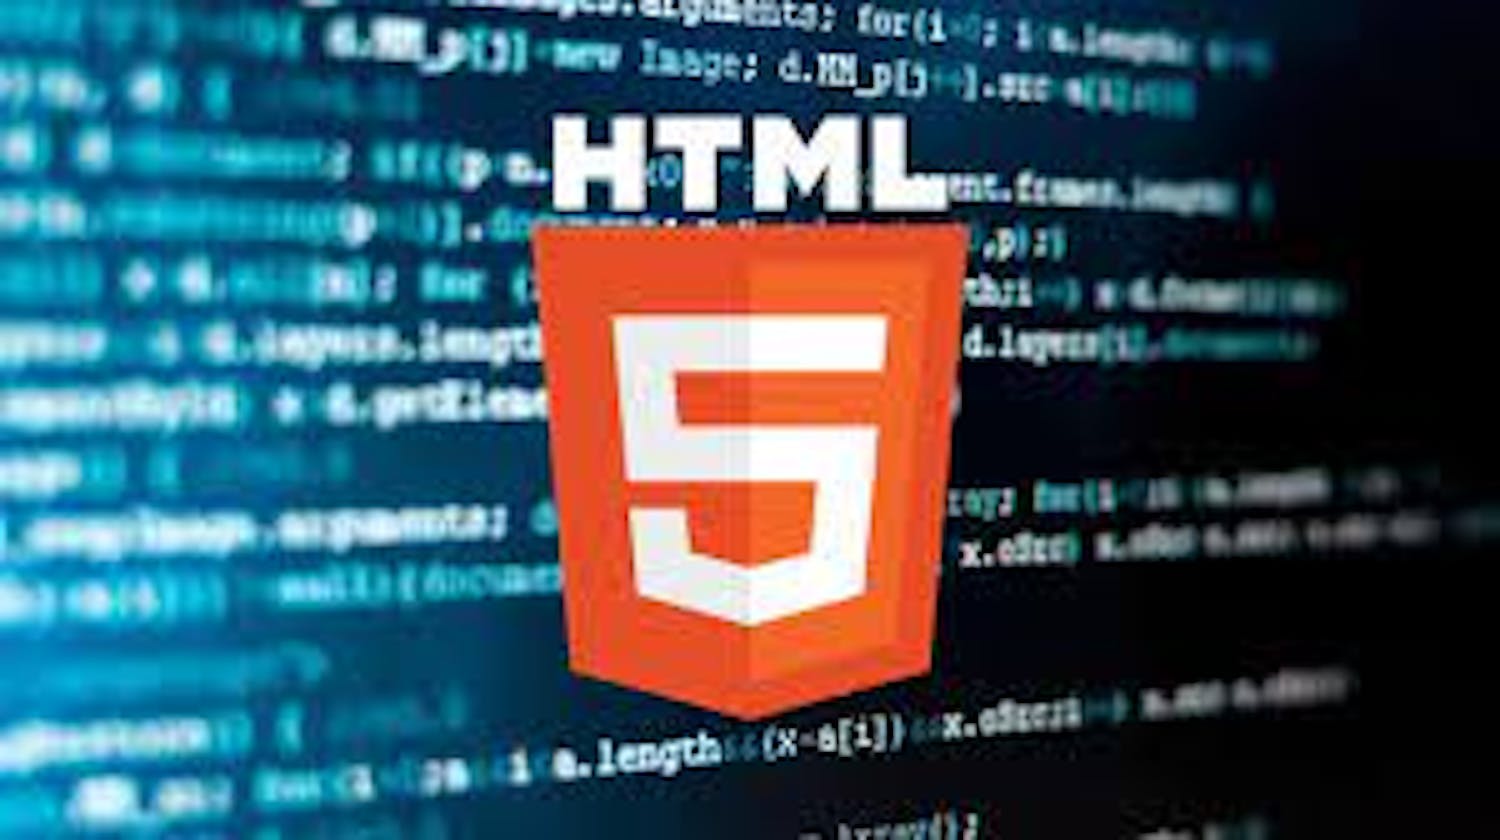 Why We Learn HTML?